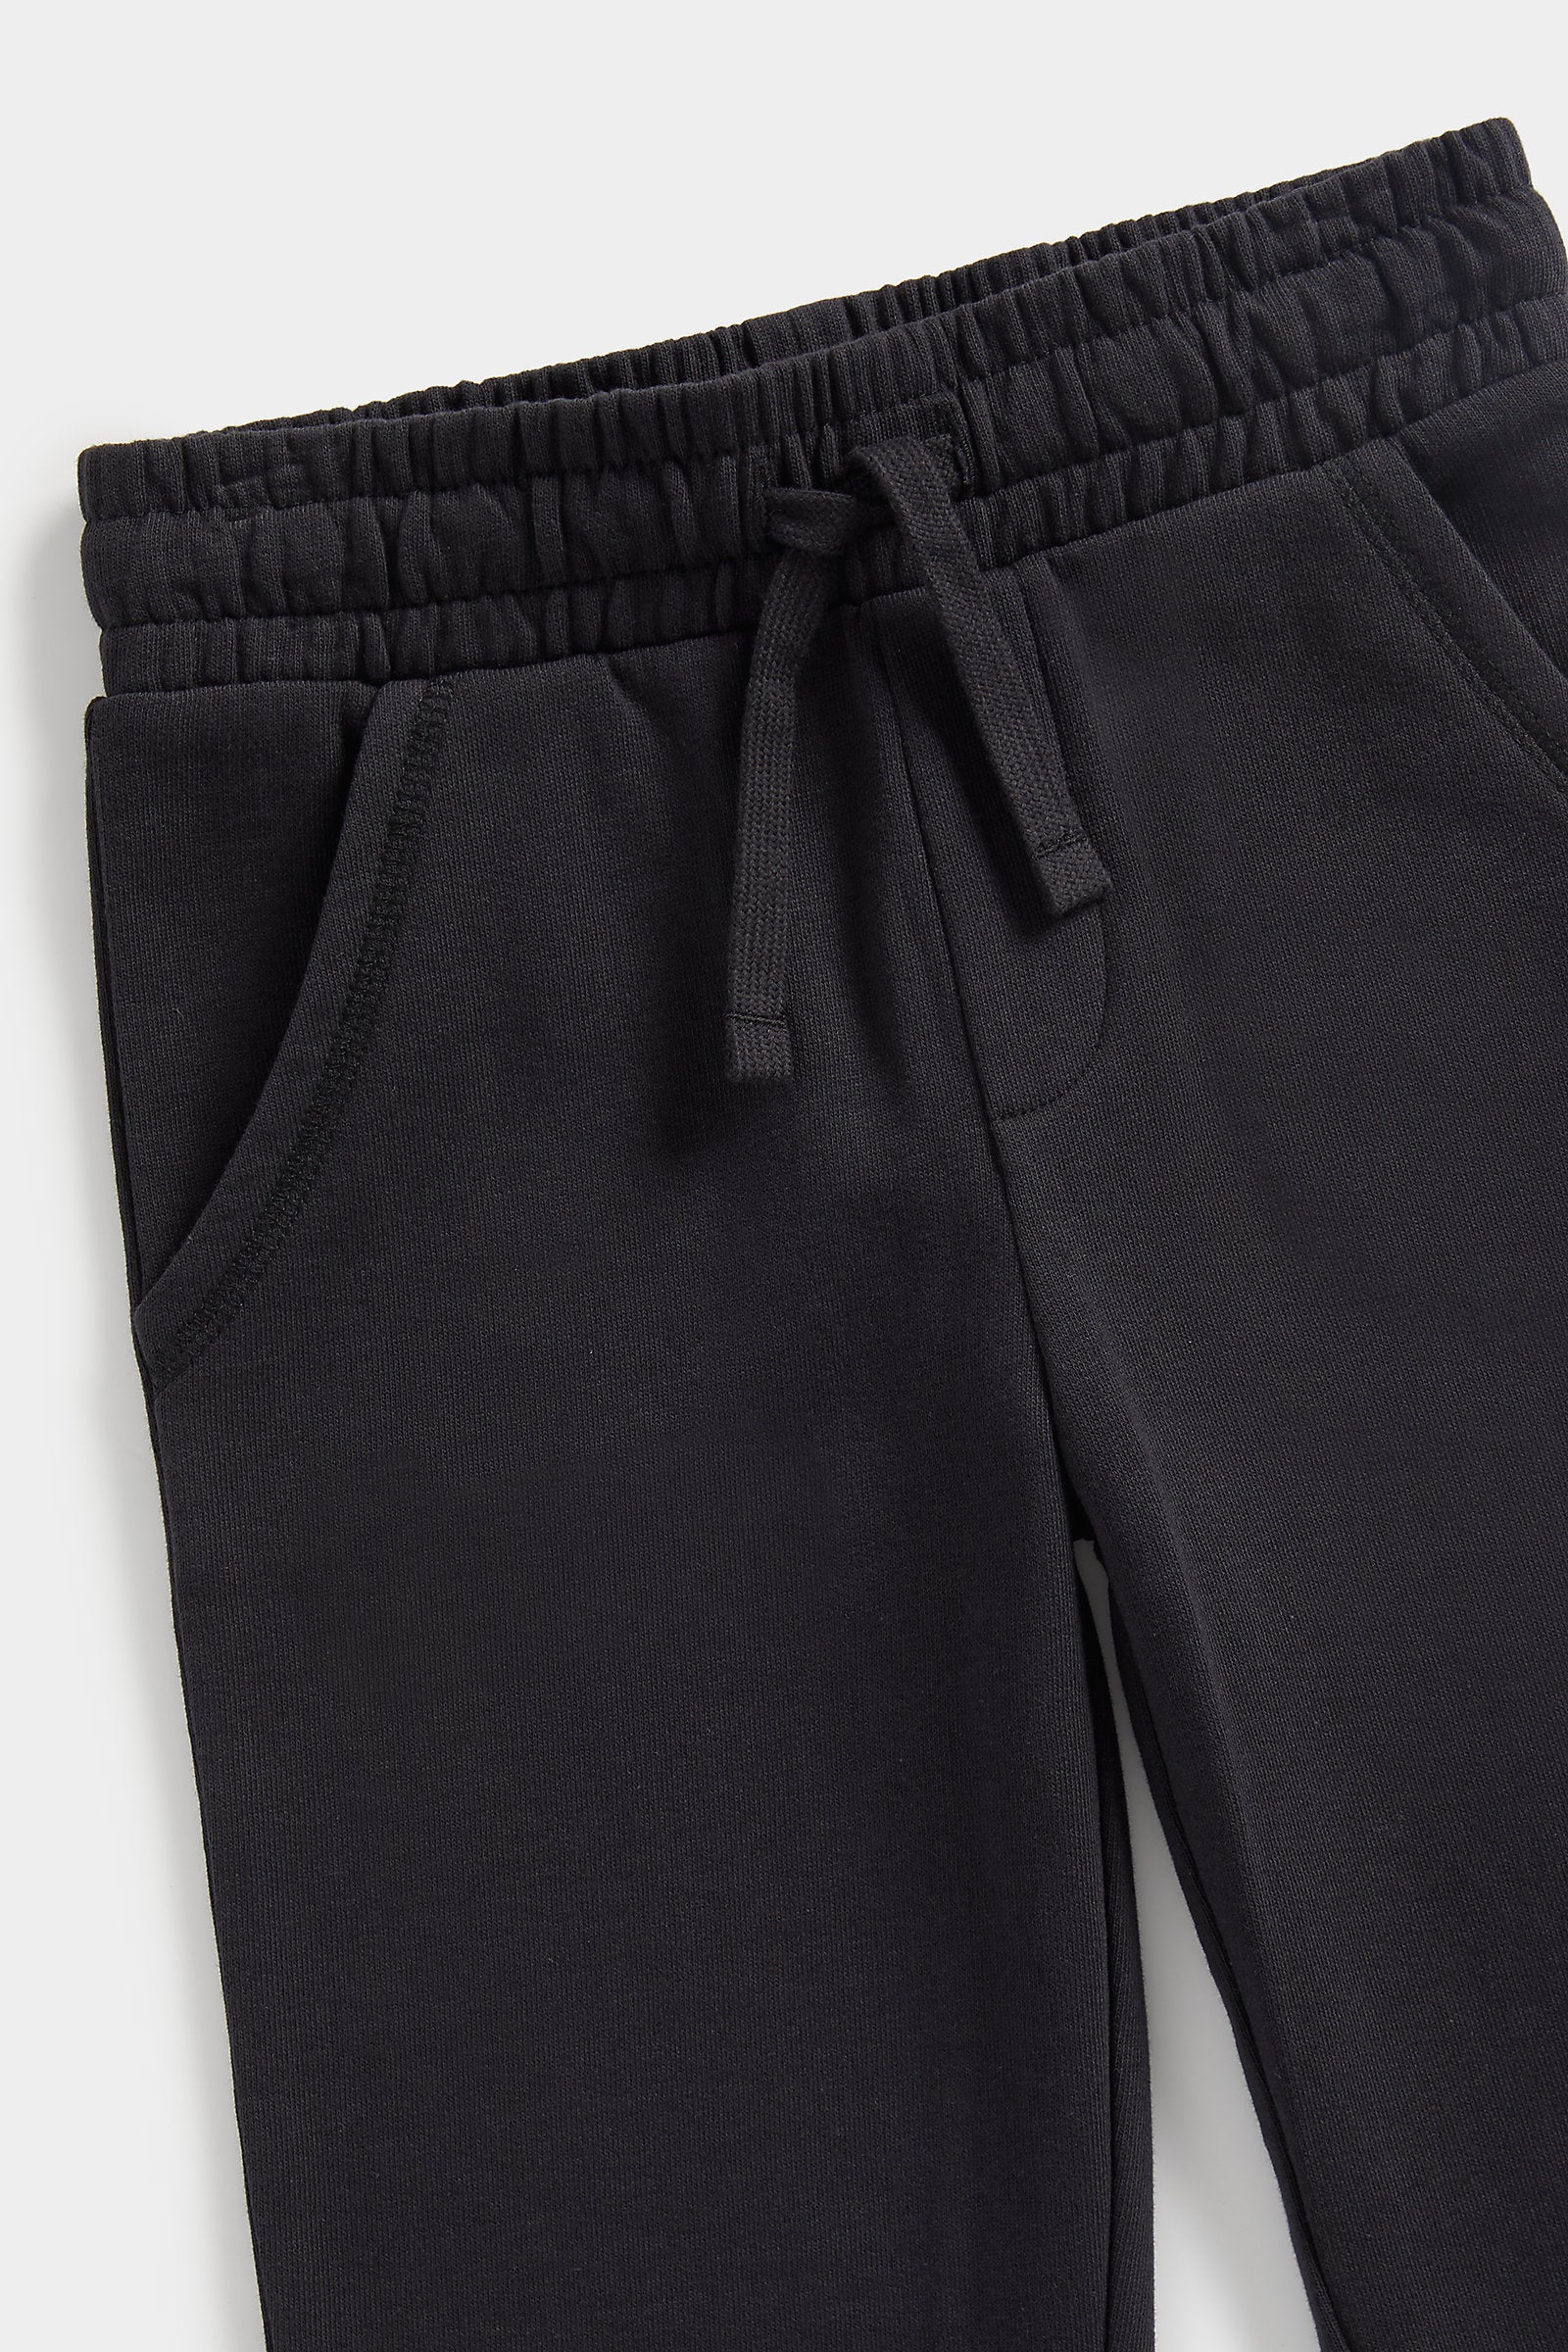 Mothercare Black Joggers